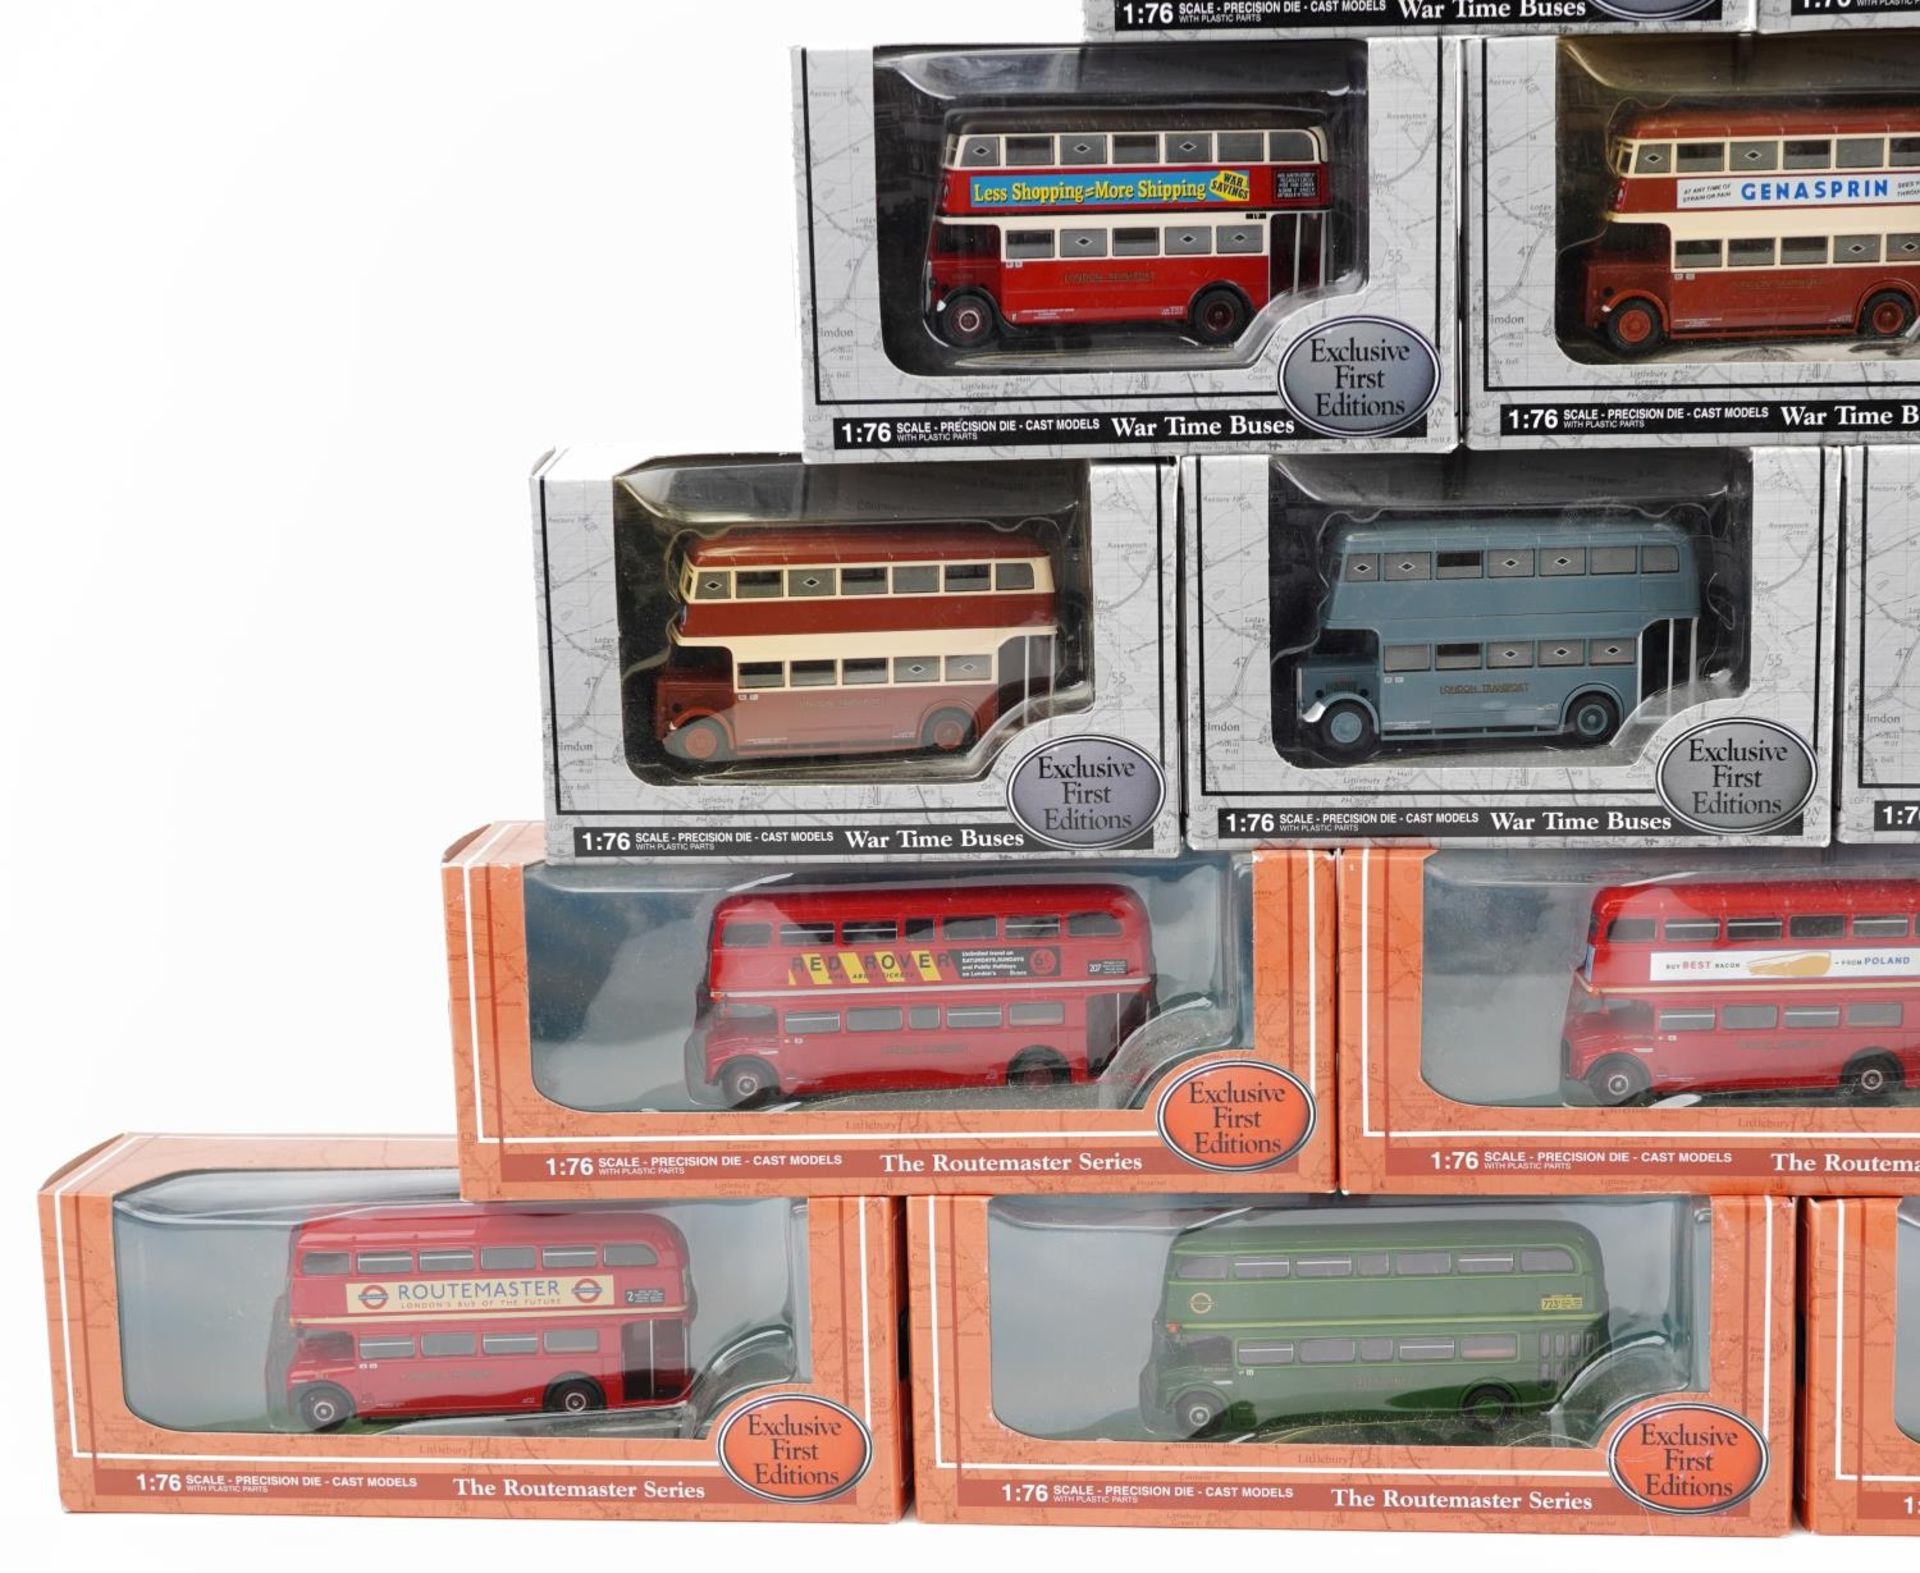 Sixteen Exclusive First Editions 1:76 scale diecast model buses with boxes from The Wartime Buses - Image 3 of 4